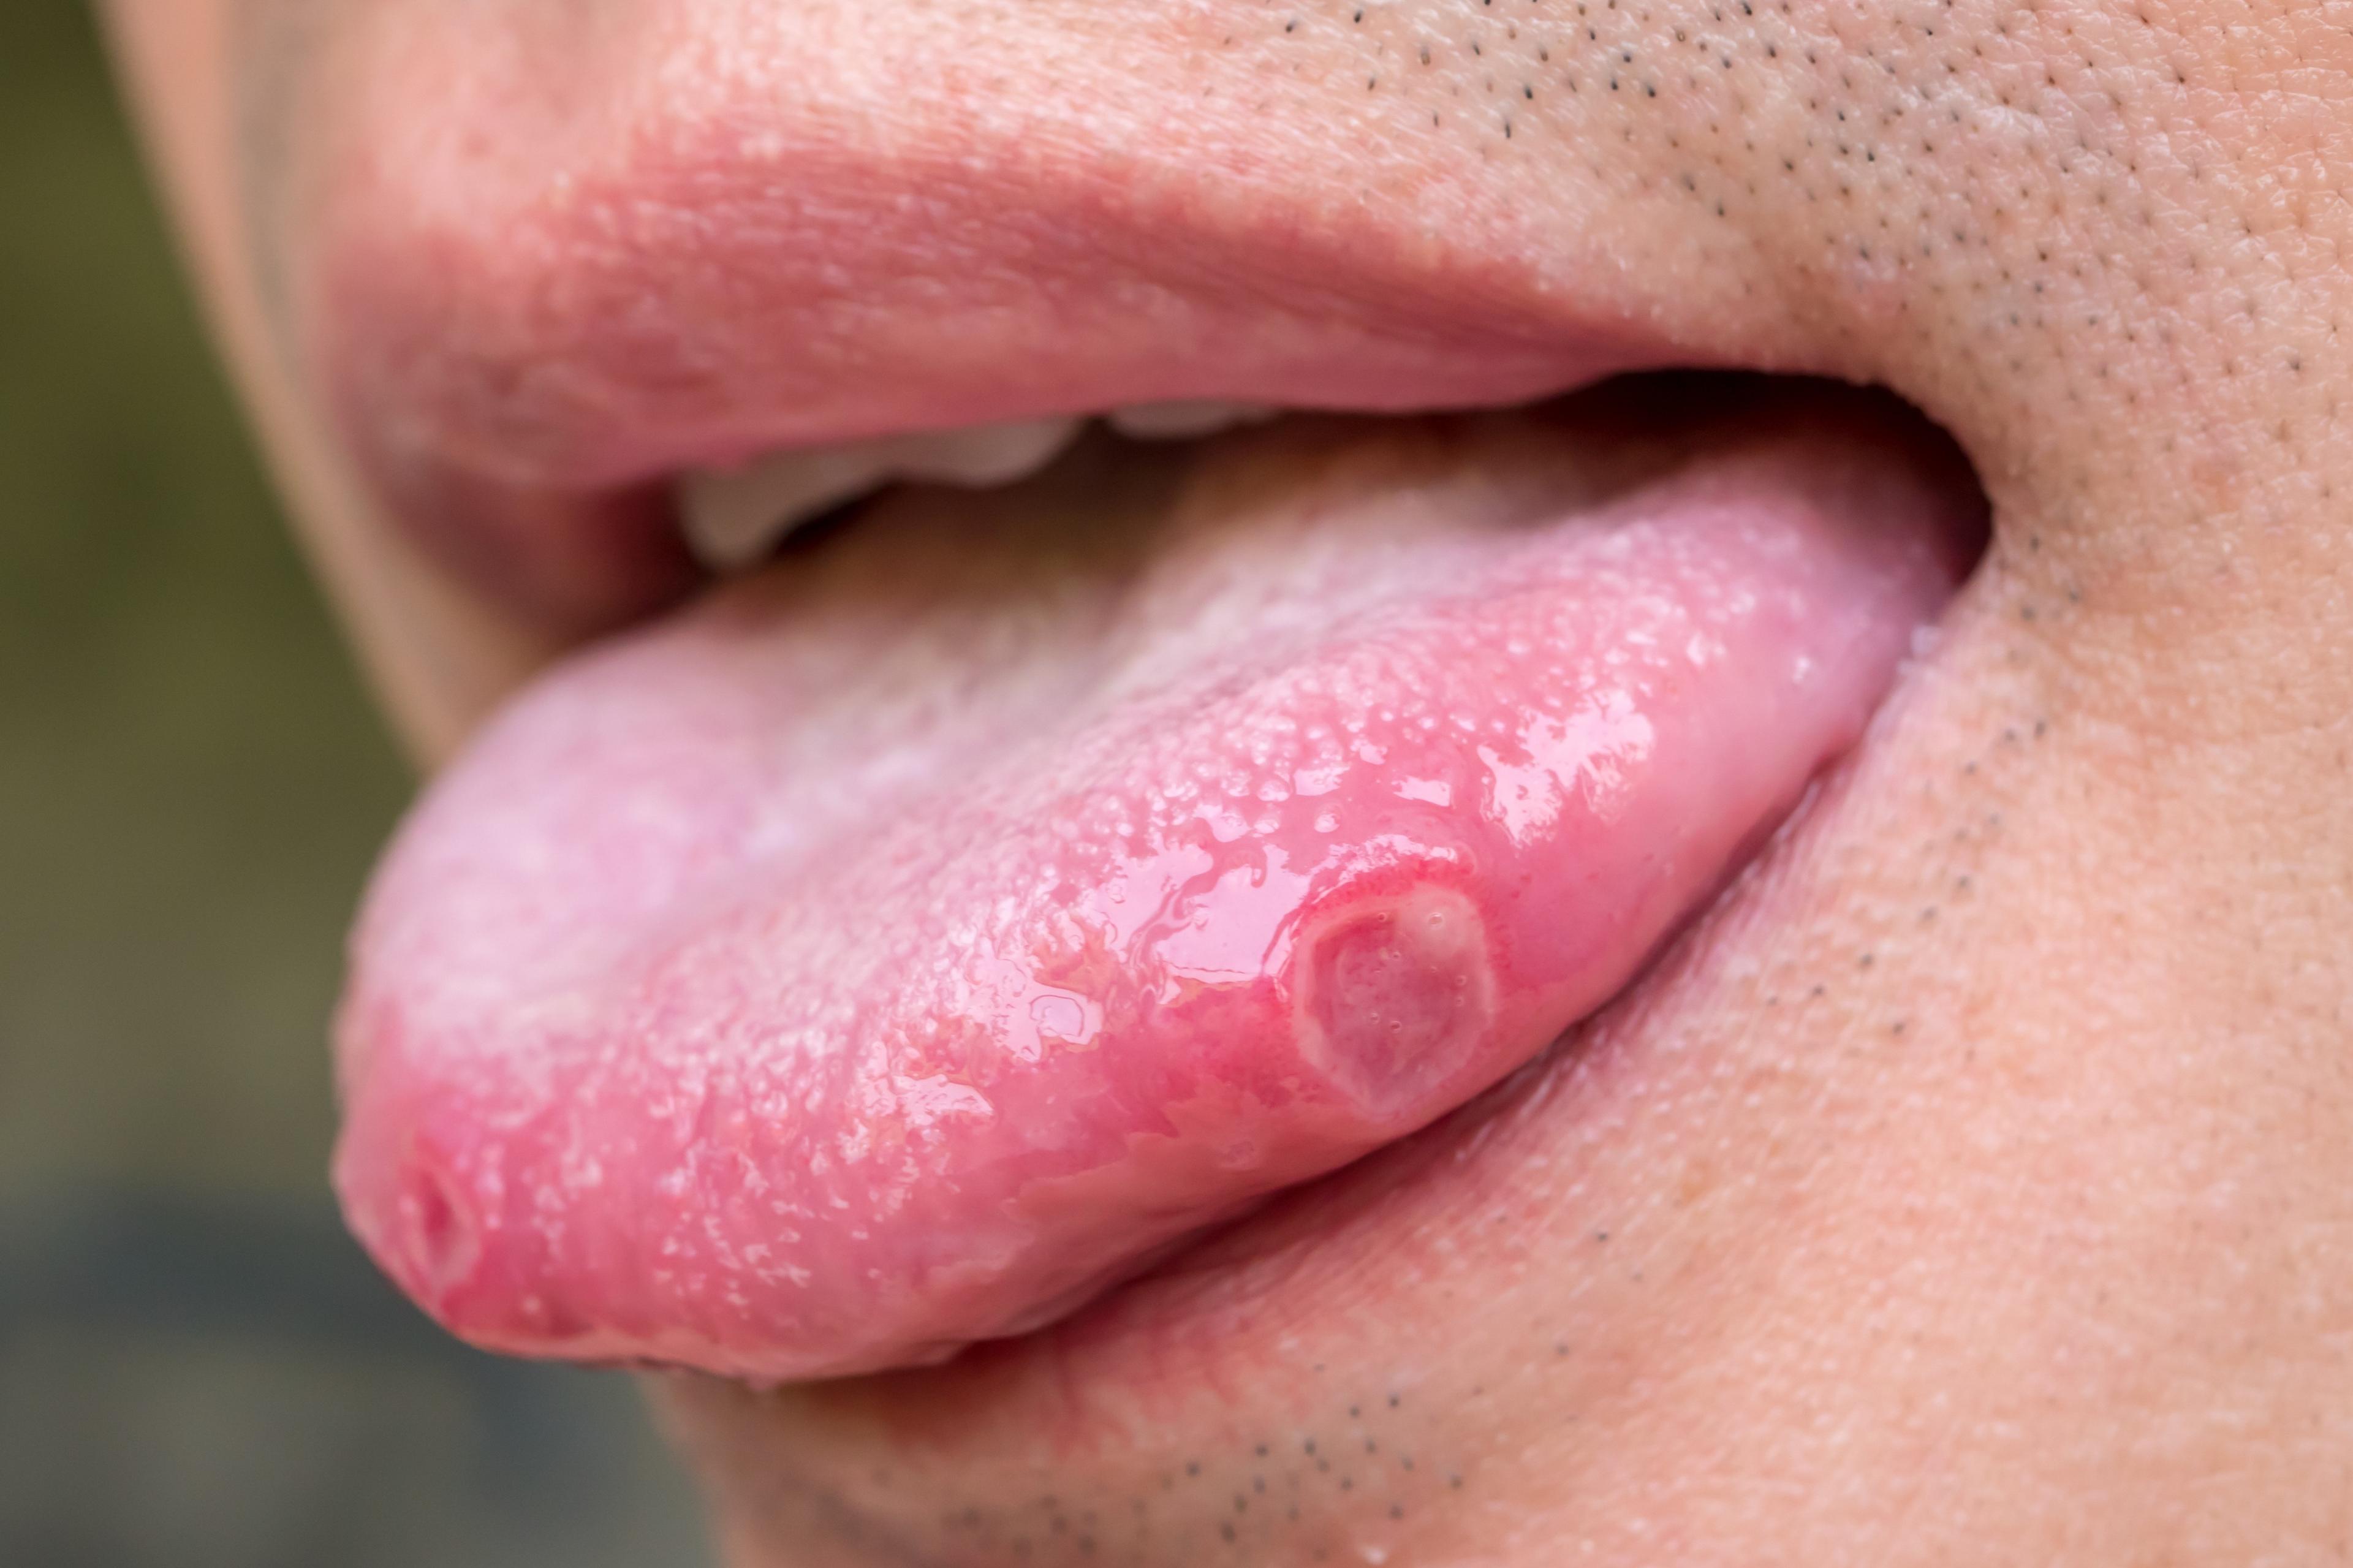 Mouth Ulcer: Types, Causes, Symptoms, and Diagnosis